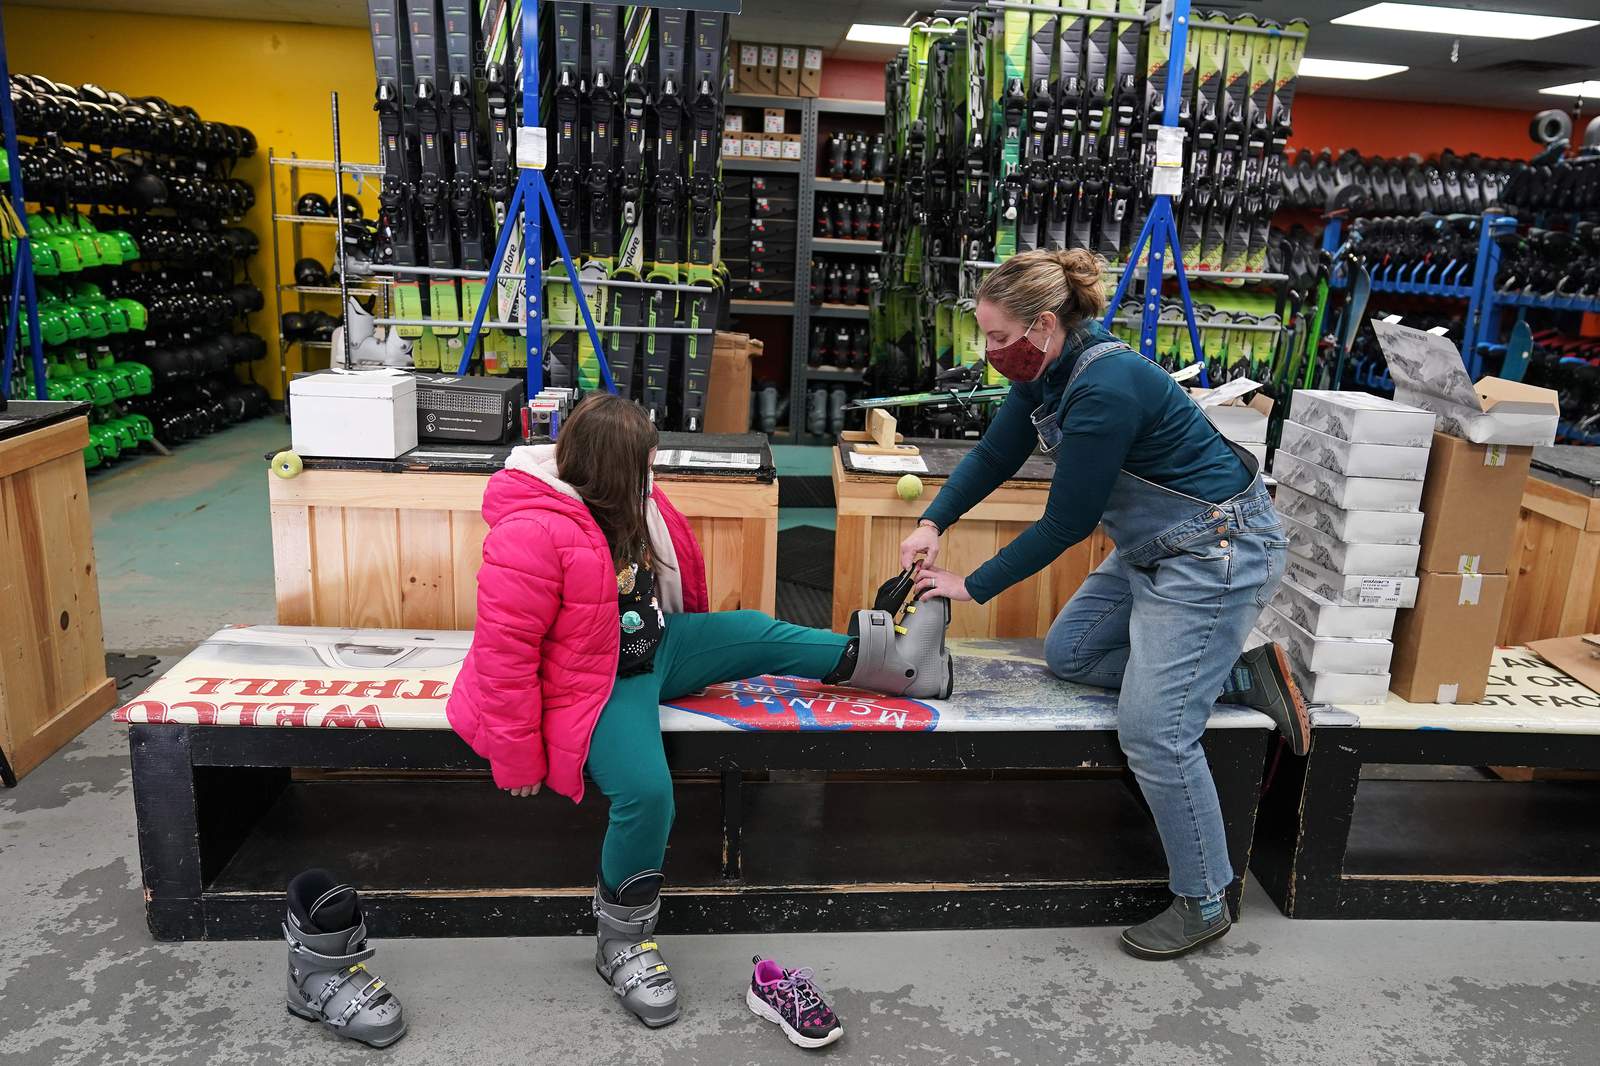 Consumers still want to get outdoors as temperatures plunge